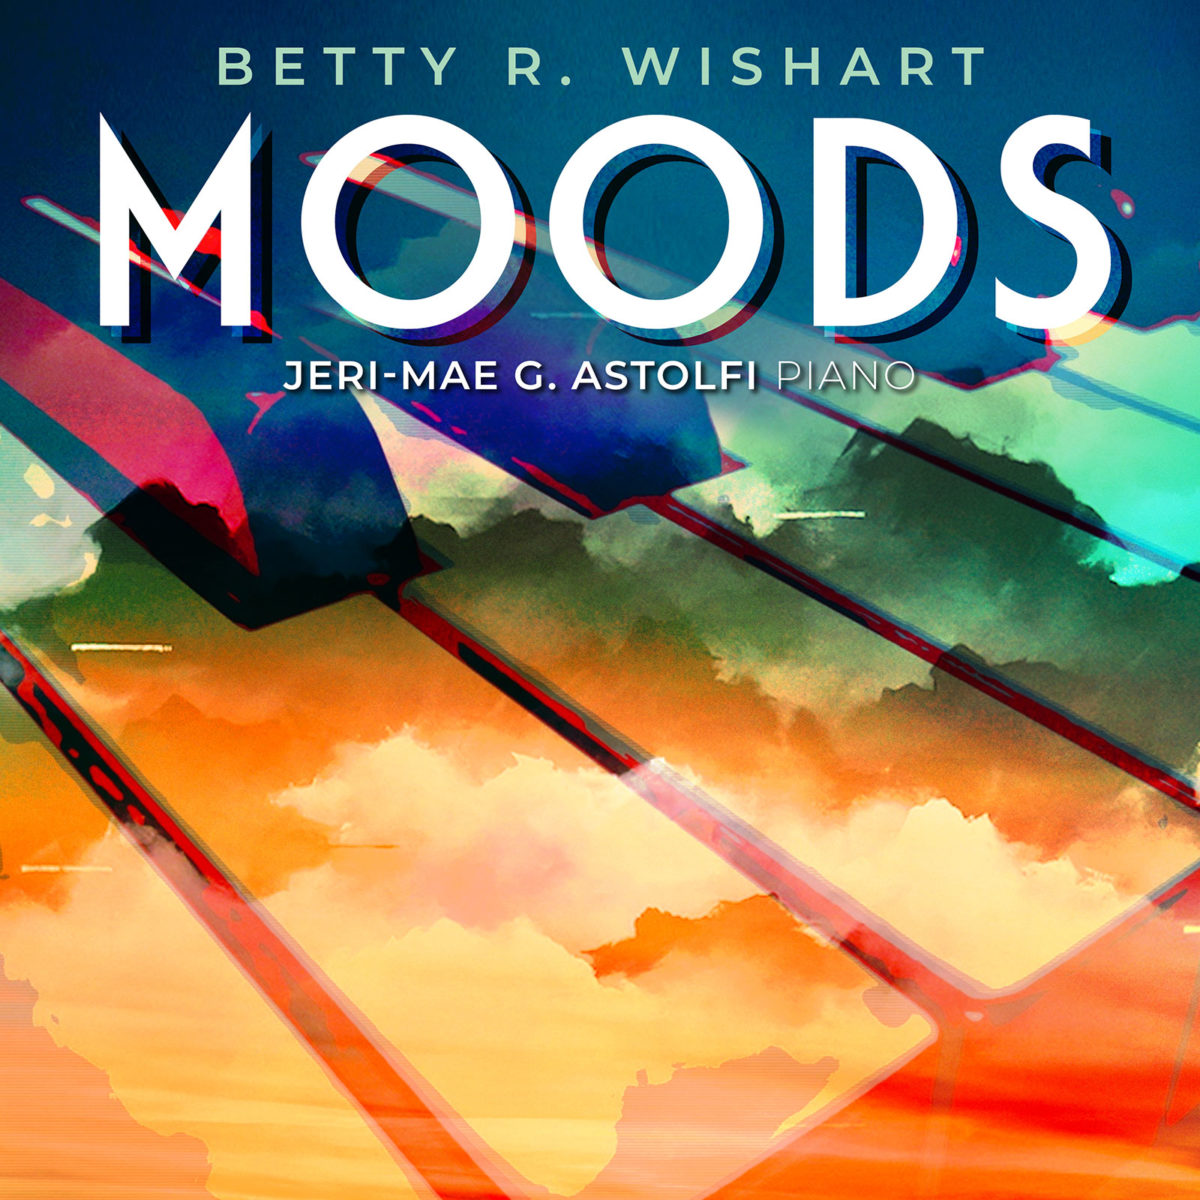 Raymond Tuttle Review: MOODS